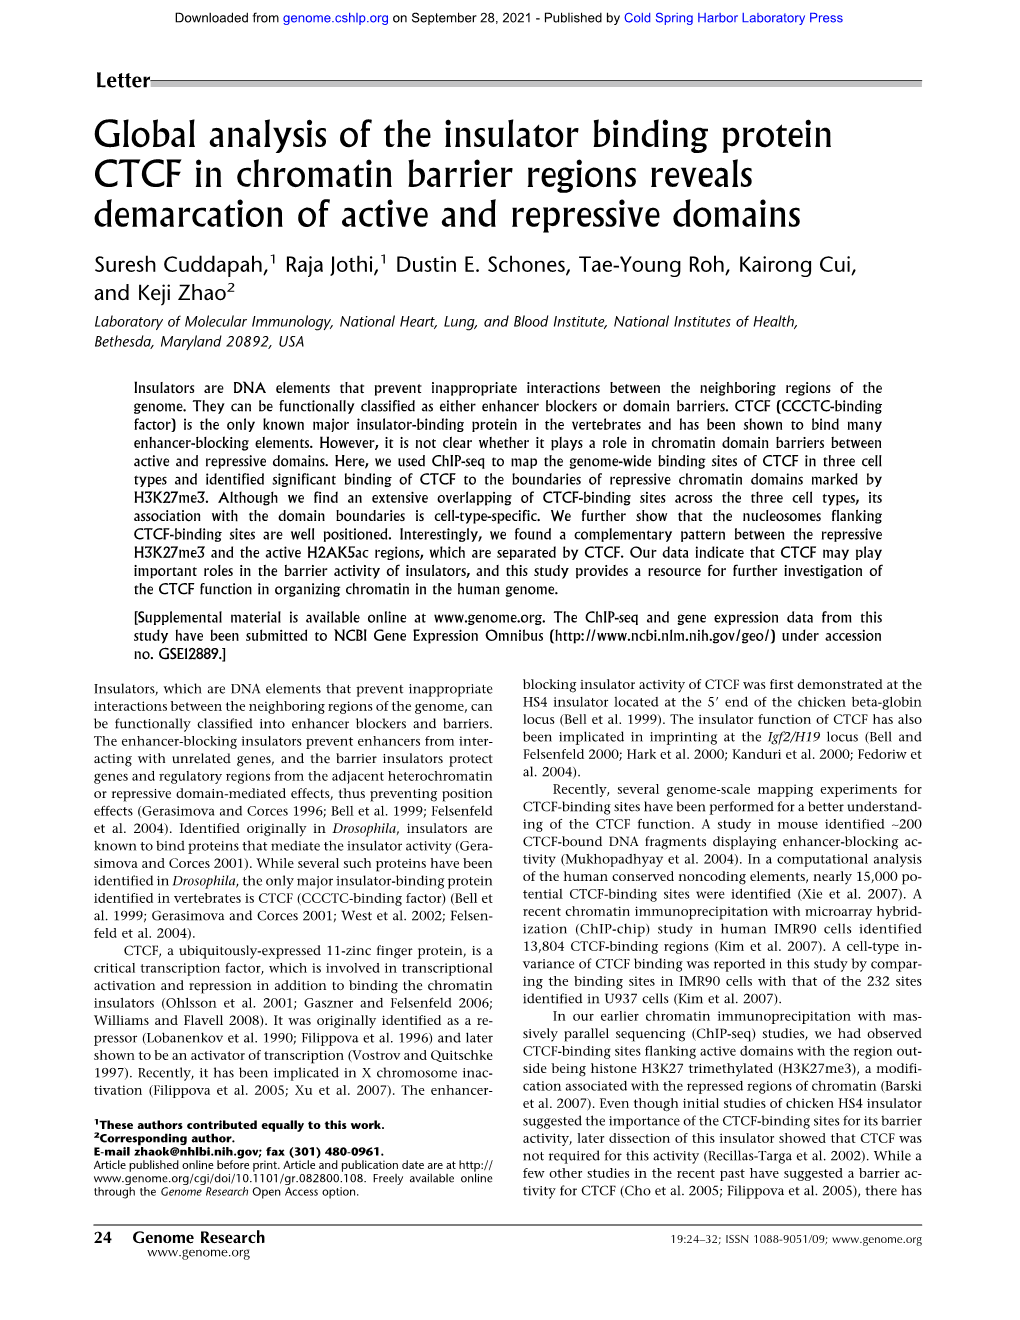 Global Analysis of the Insulator Binding Protein CTCF in Chromatin Barrier Regions Reveals Demarcation of Active and Repressive Domains